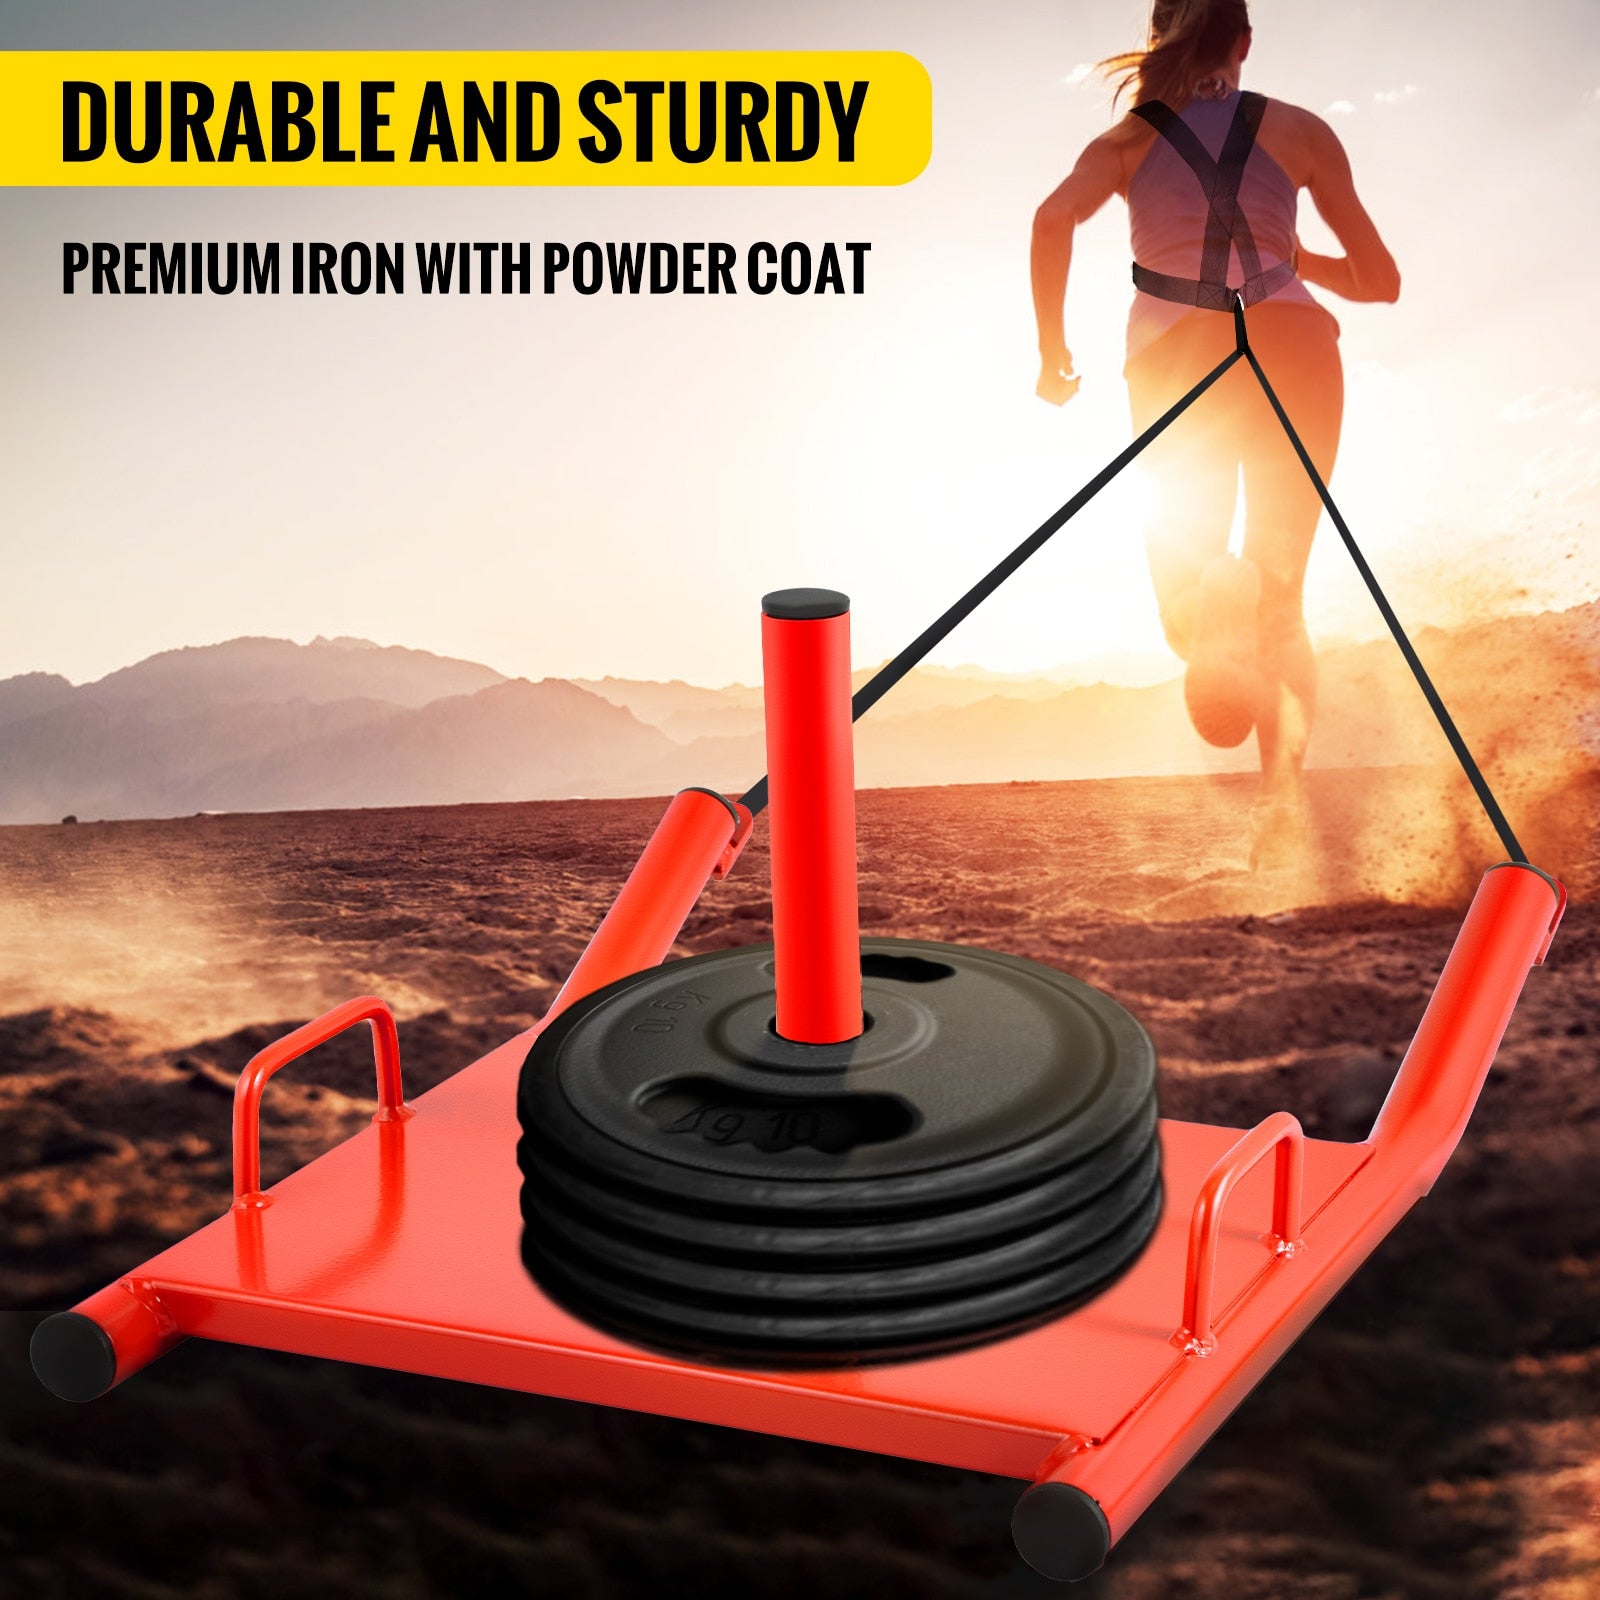 Durable and study JB Muscle™ Red HD Power Sled: Ultimate Strength Training with powder coat.